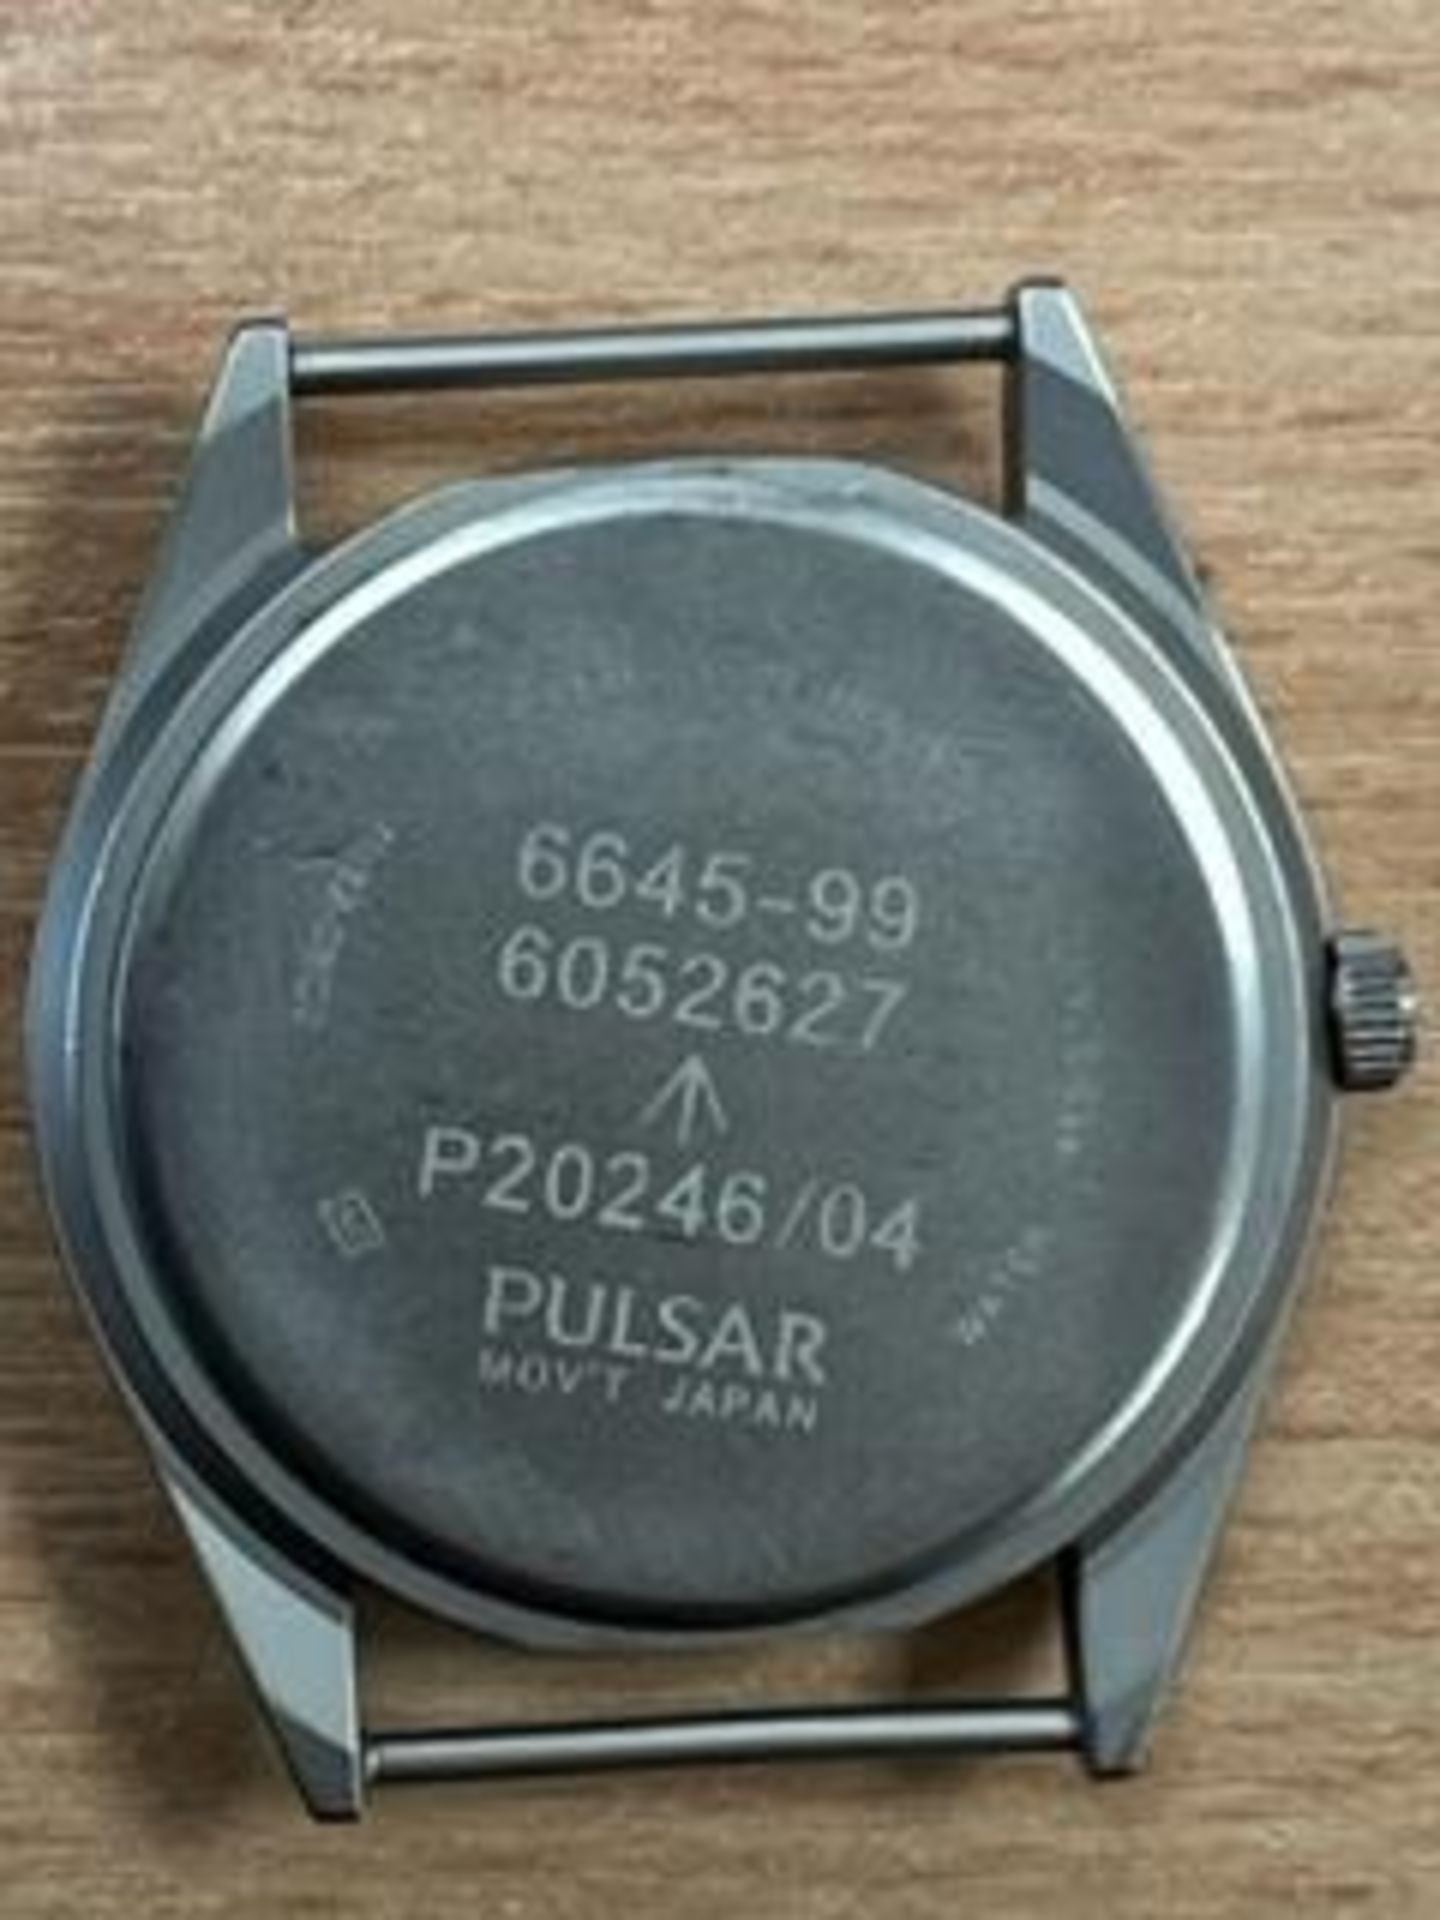 PULSAR BRITISH ARMY W10 SERVICE WATCH WATER RESISTANT NATO MARKS DATE 2004 - Image 5 of 6